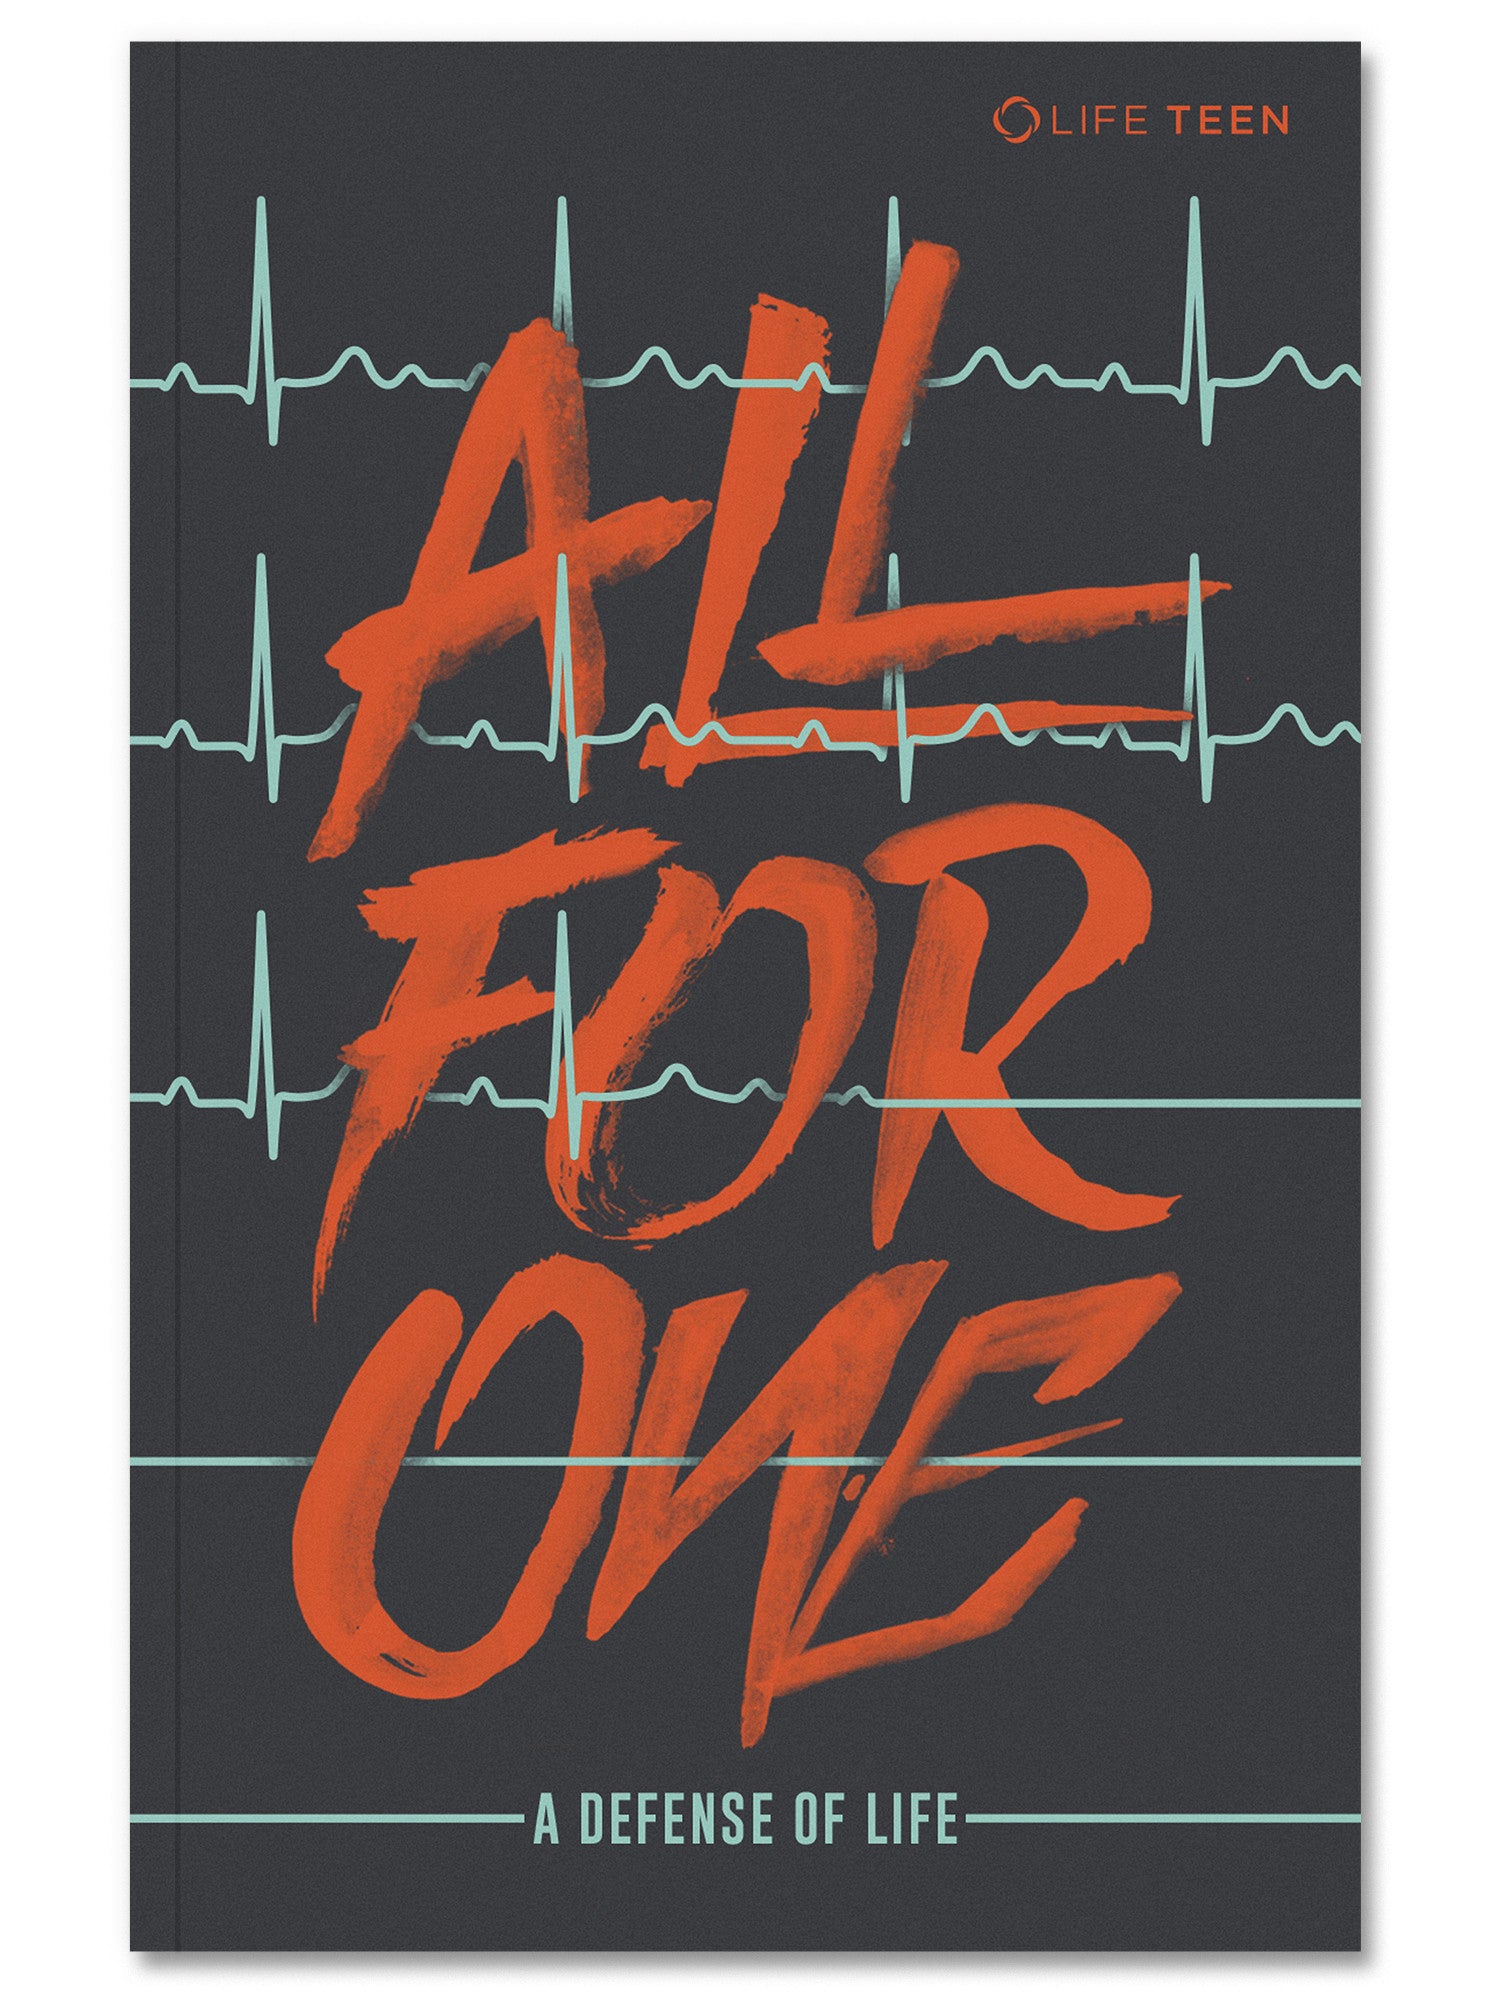 All For One: A Pocket Companion on the Defense of Life